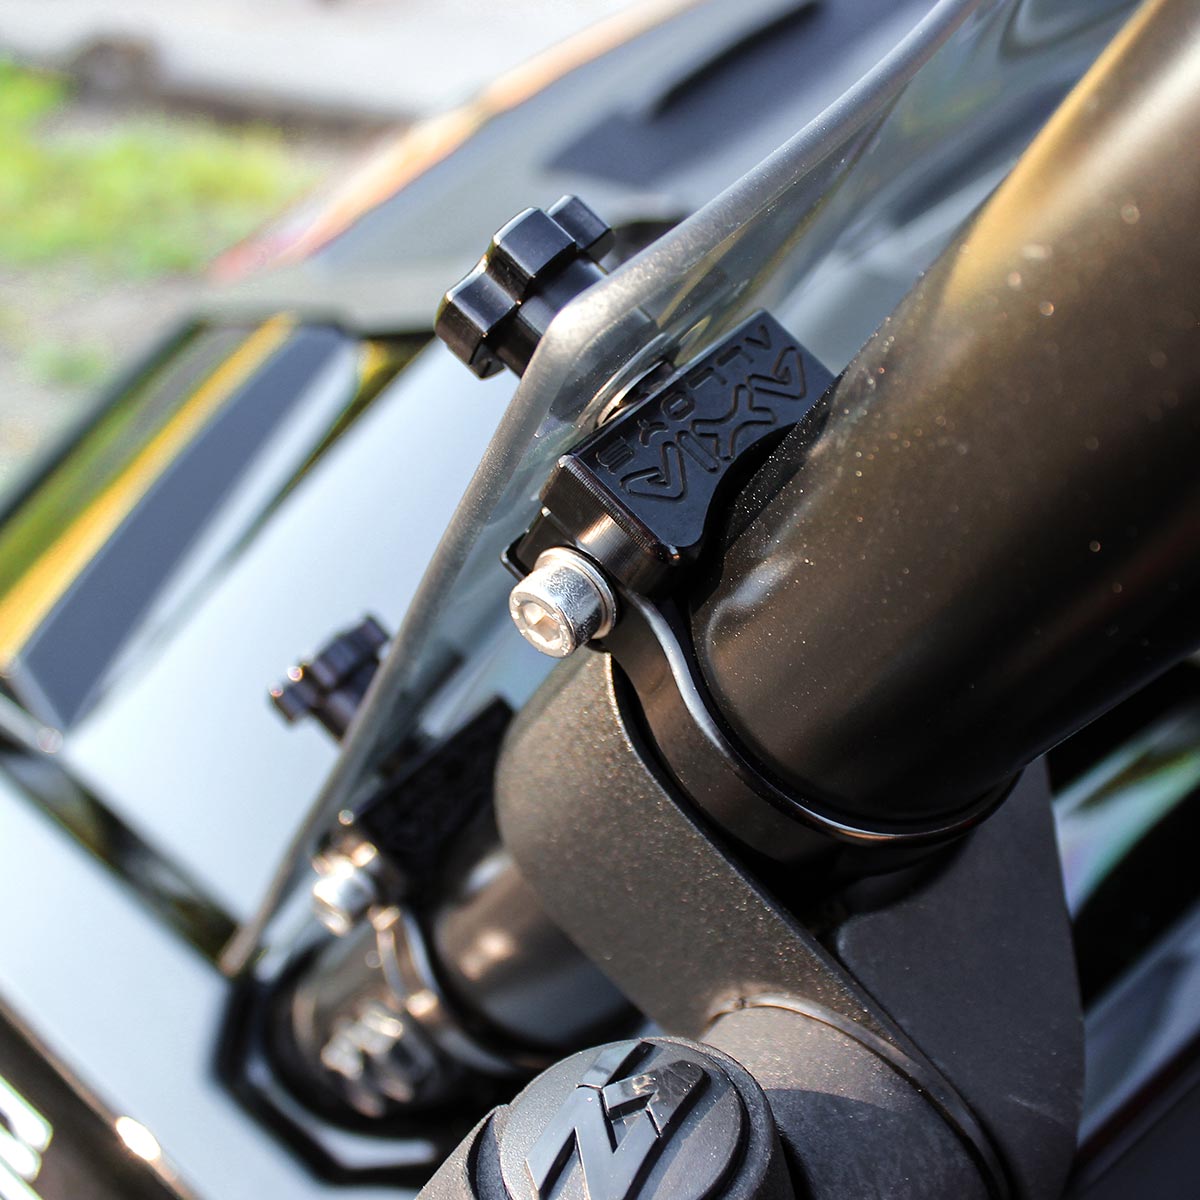 Axia Alloys Thumbscrew clamps shown on UTV Flare™ Windshield for Polaris® RZR 2014-2018 models(Clamps)